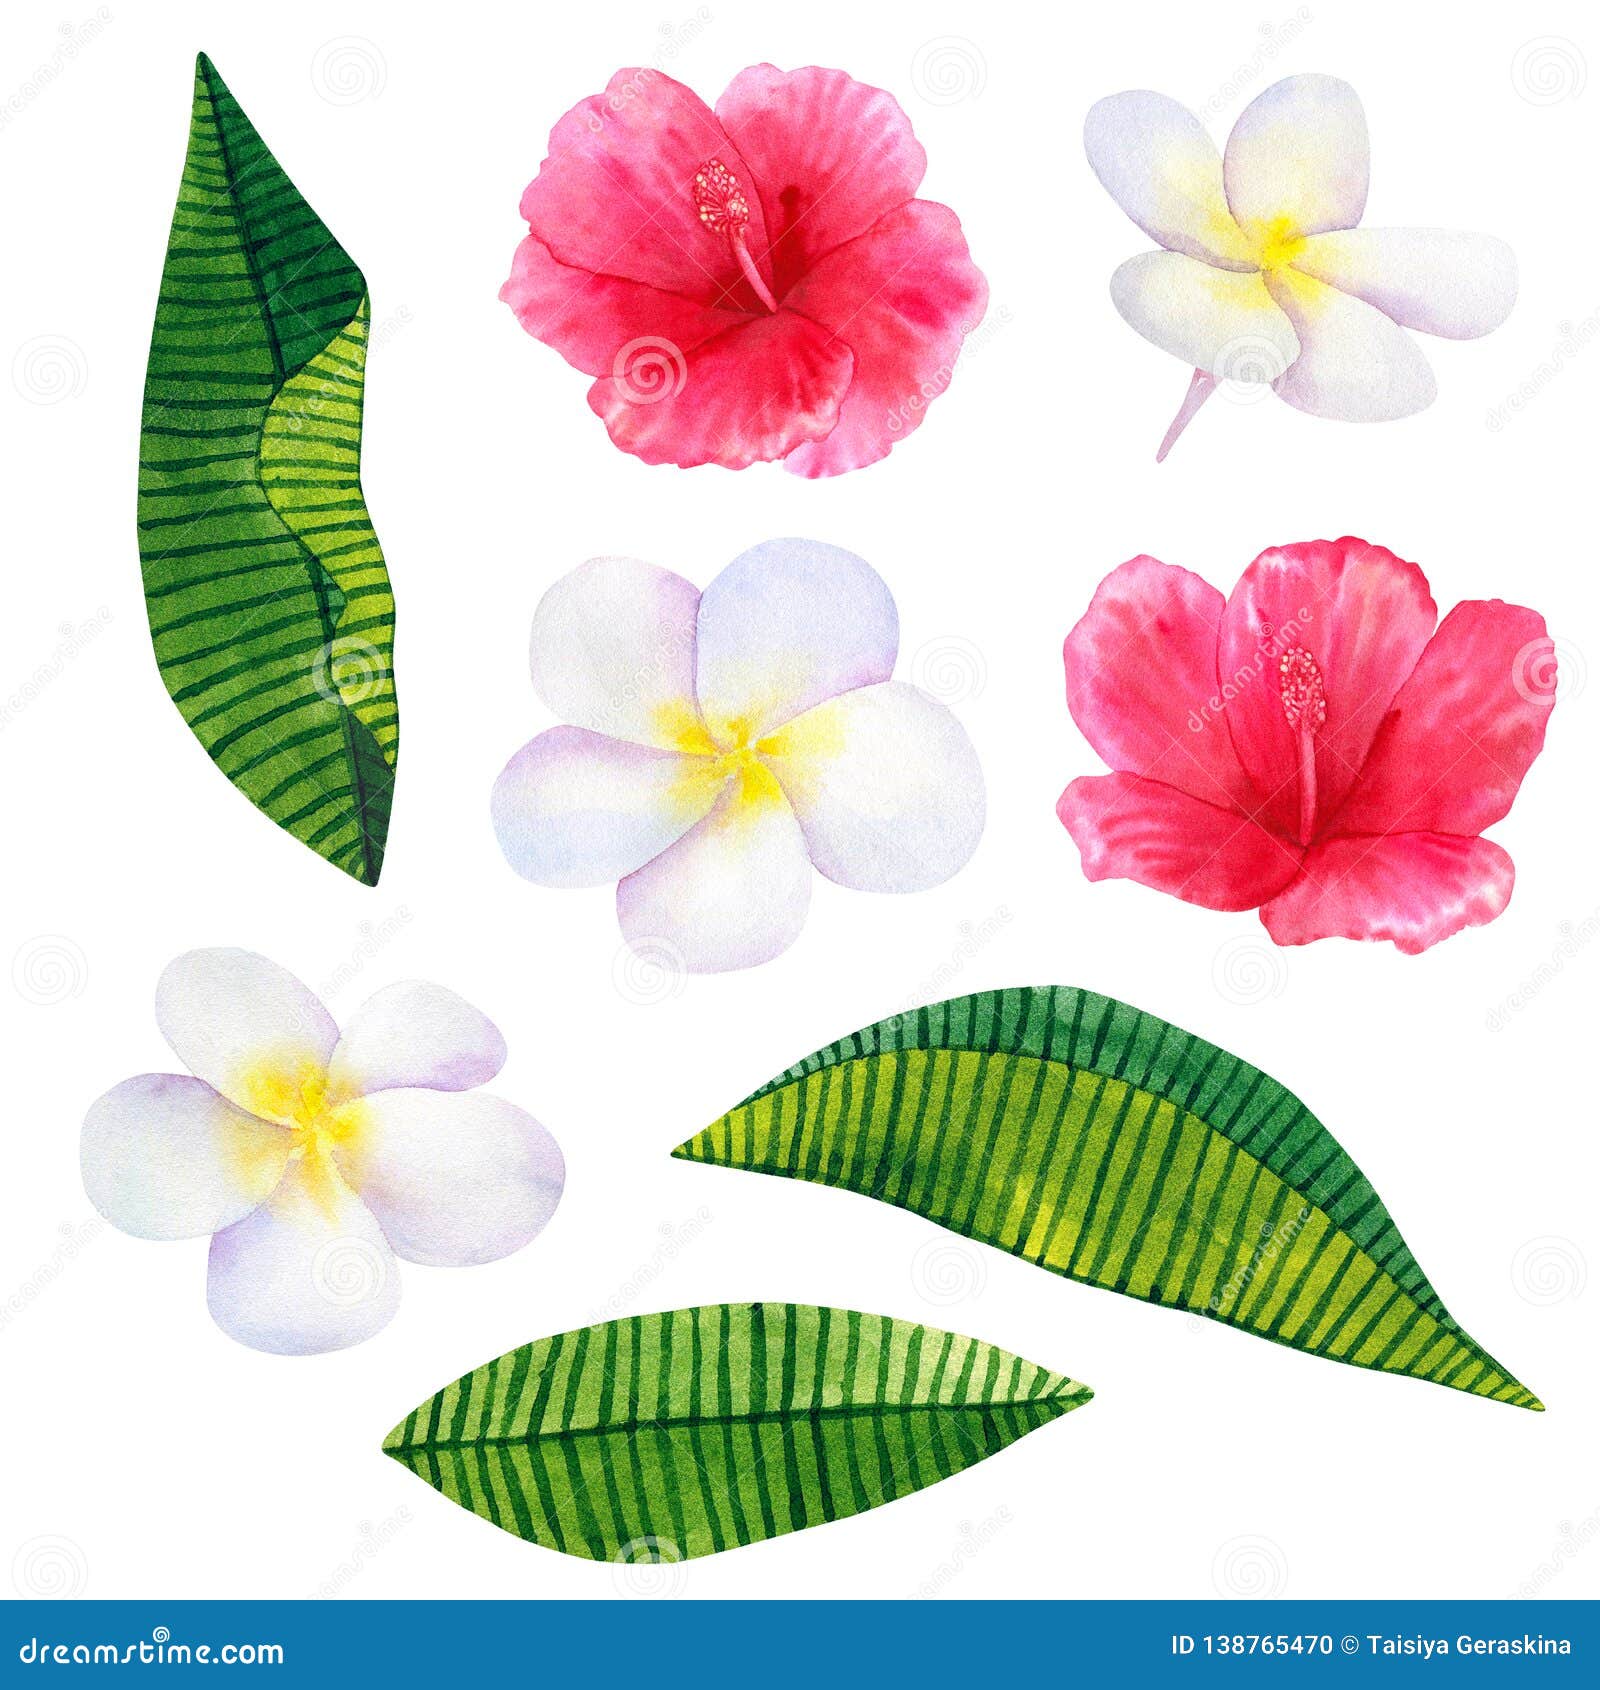 beautiful pink red flowers hibiscus and white frangipani or plumeria. hand drawn watercolor .  on white